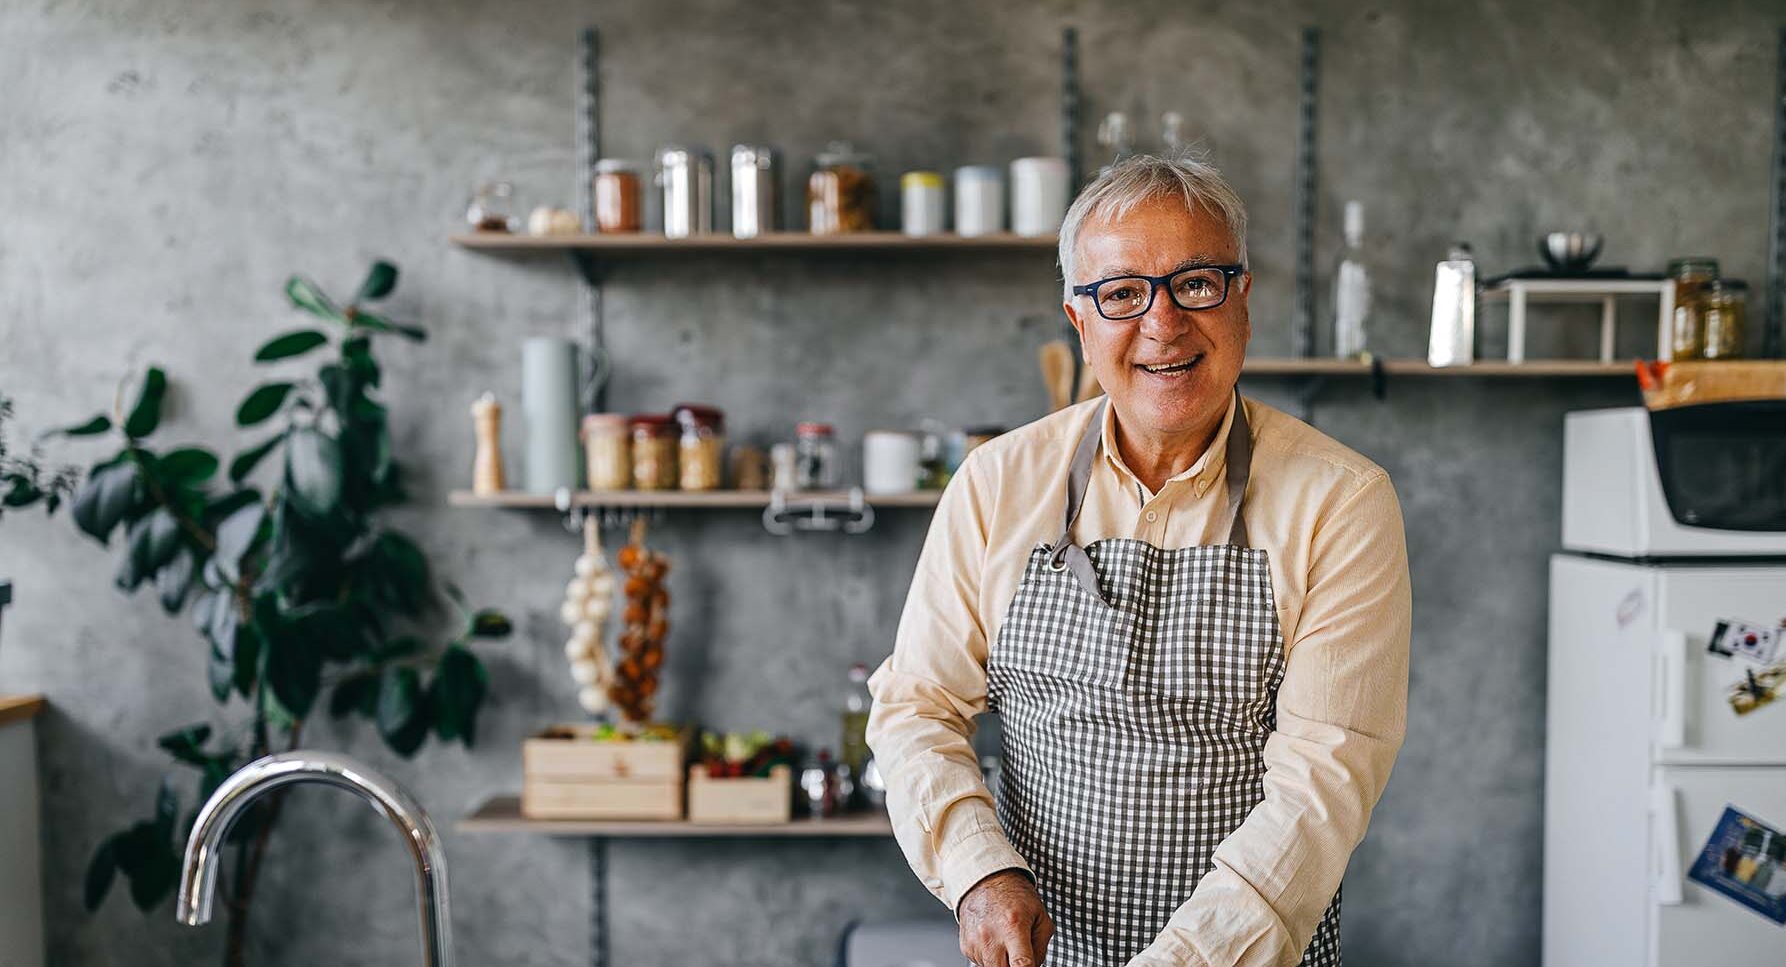 Happy senior man chops vegetables in a minimalistic but cool looking kitchen with gray walls.